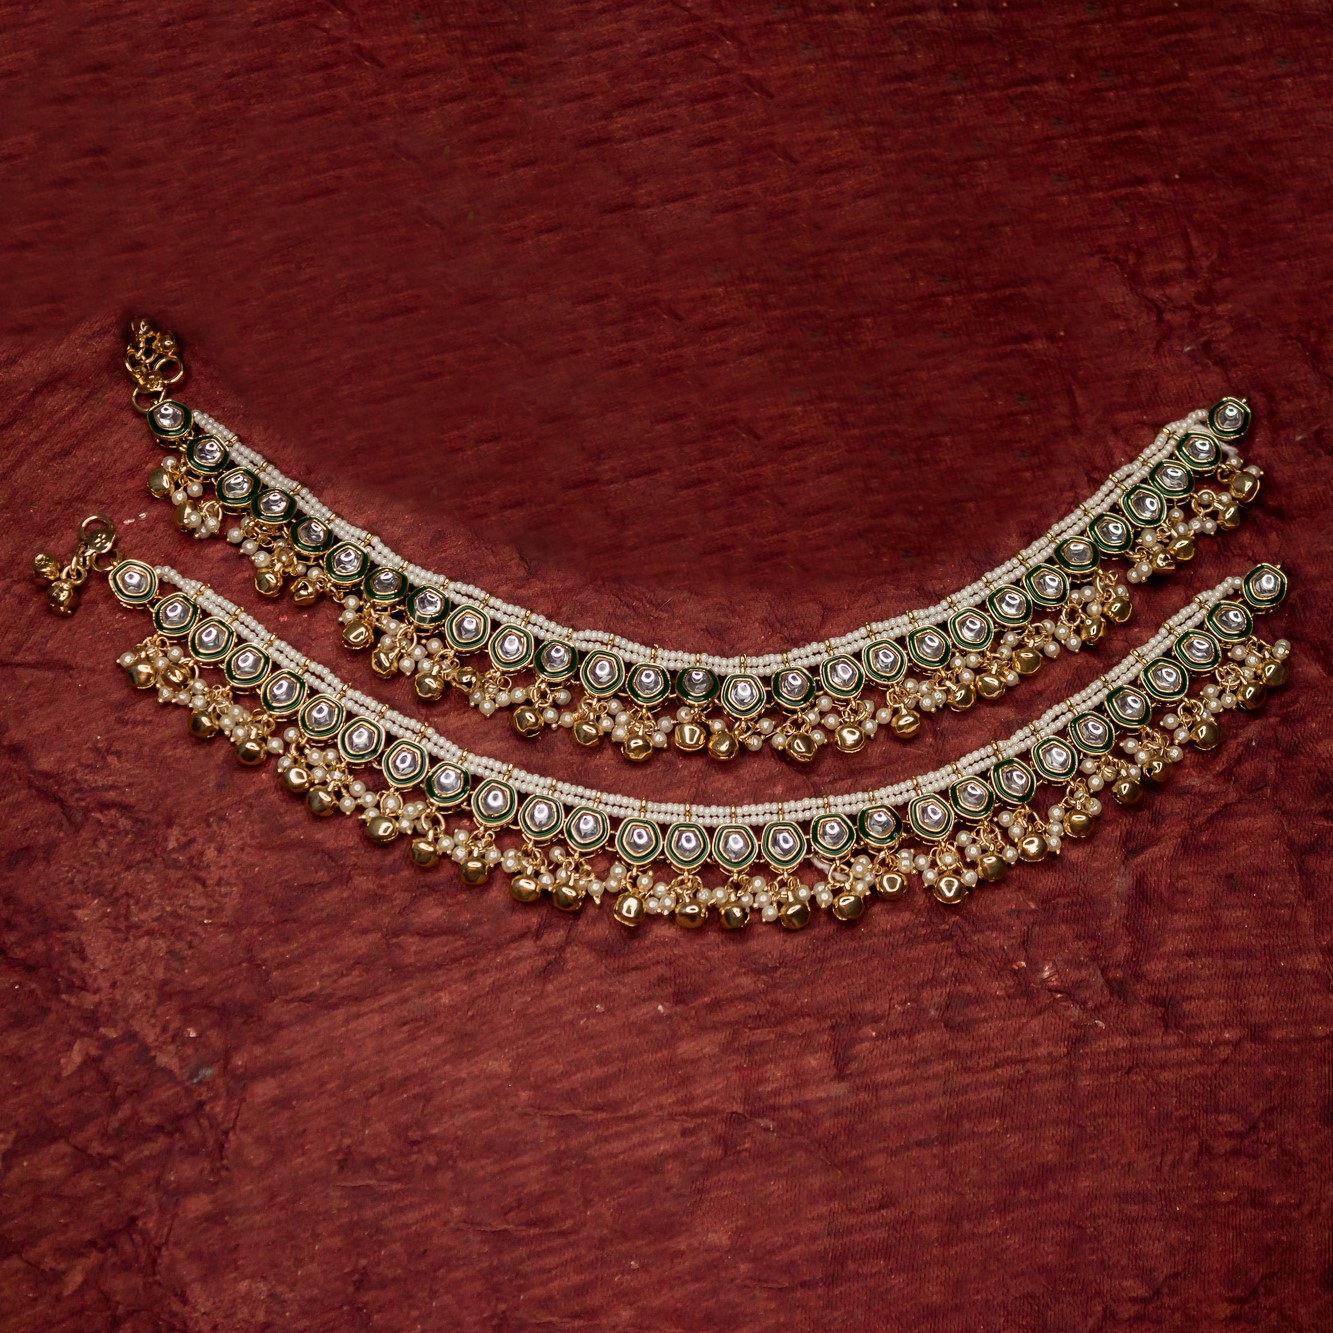 GREEN MEENAKARI ANKLETS WITH GOLDEN GHUNGROO